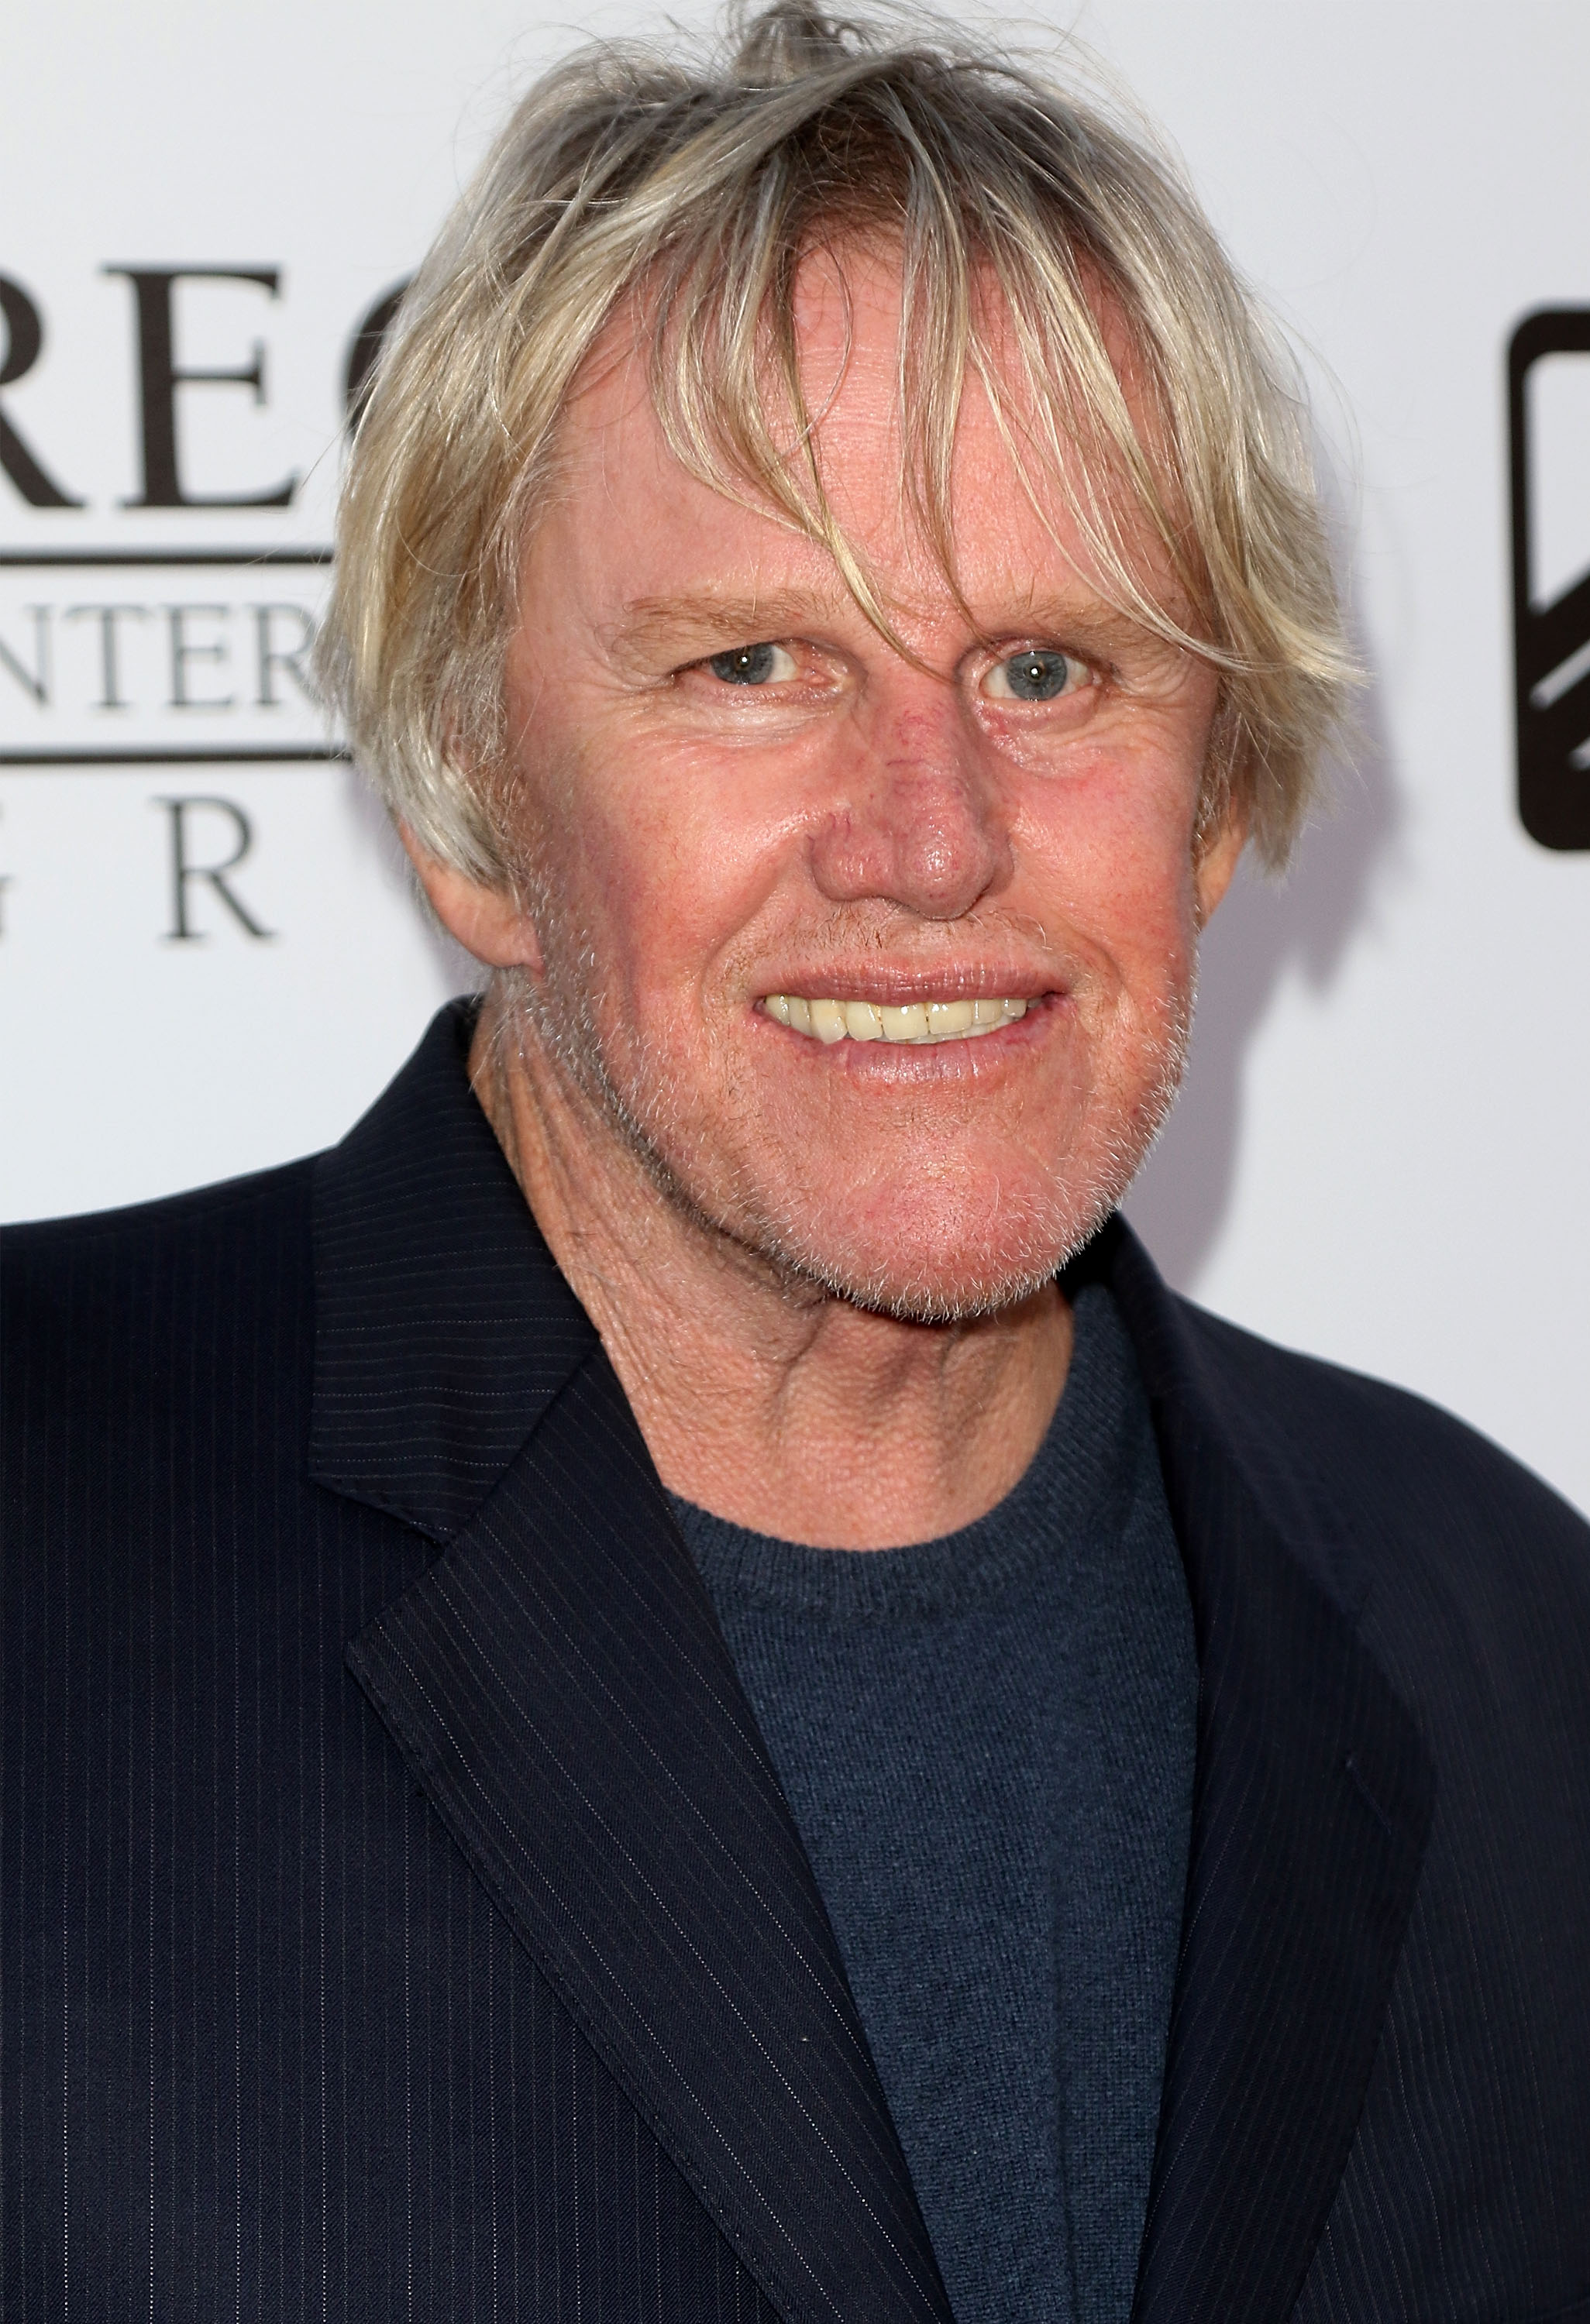 Gary Busey attends the 5th Annual Variety "The Children's Charity of SoCal Texas Hold 'Em Poker Tournament" at Paramount Studios on July 22, 2015 in Hollywood, California. | Source: Getty Images